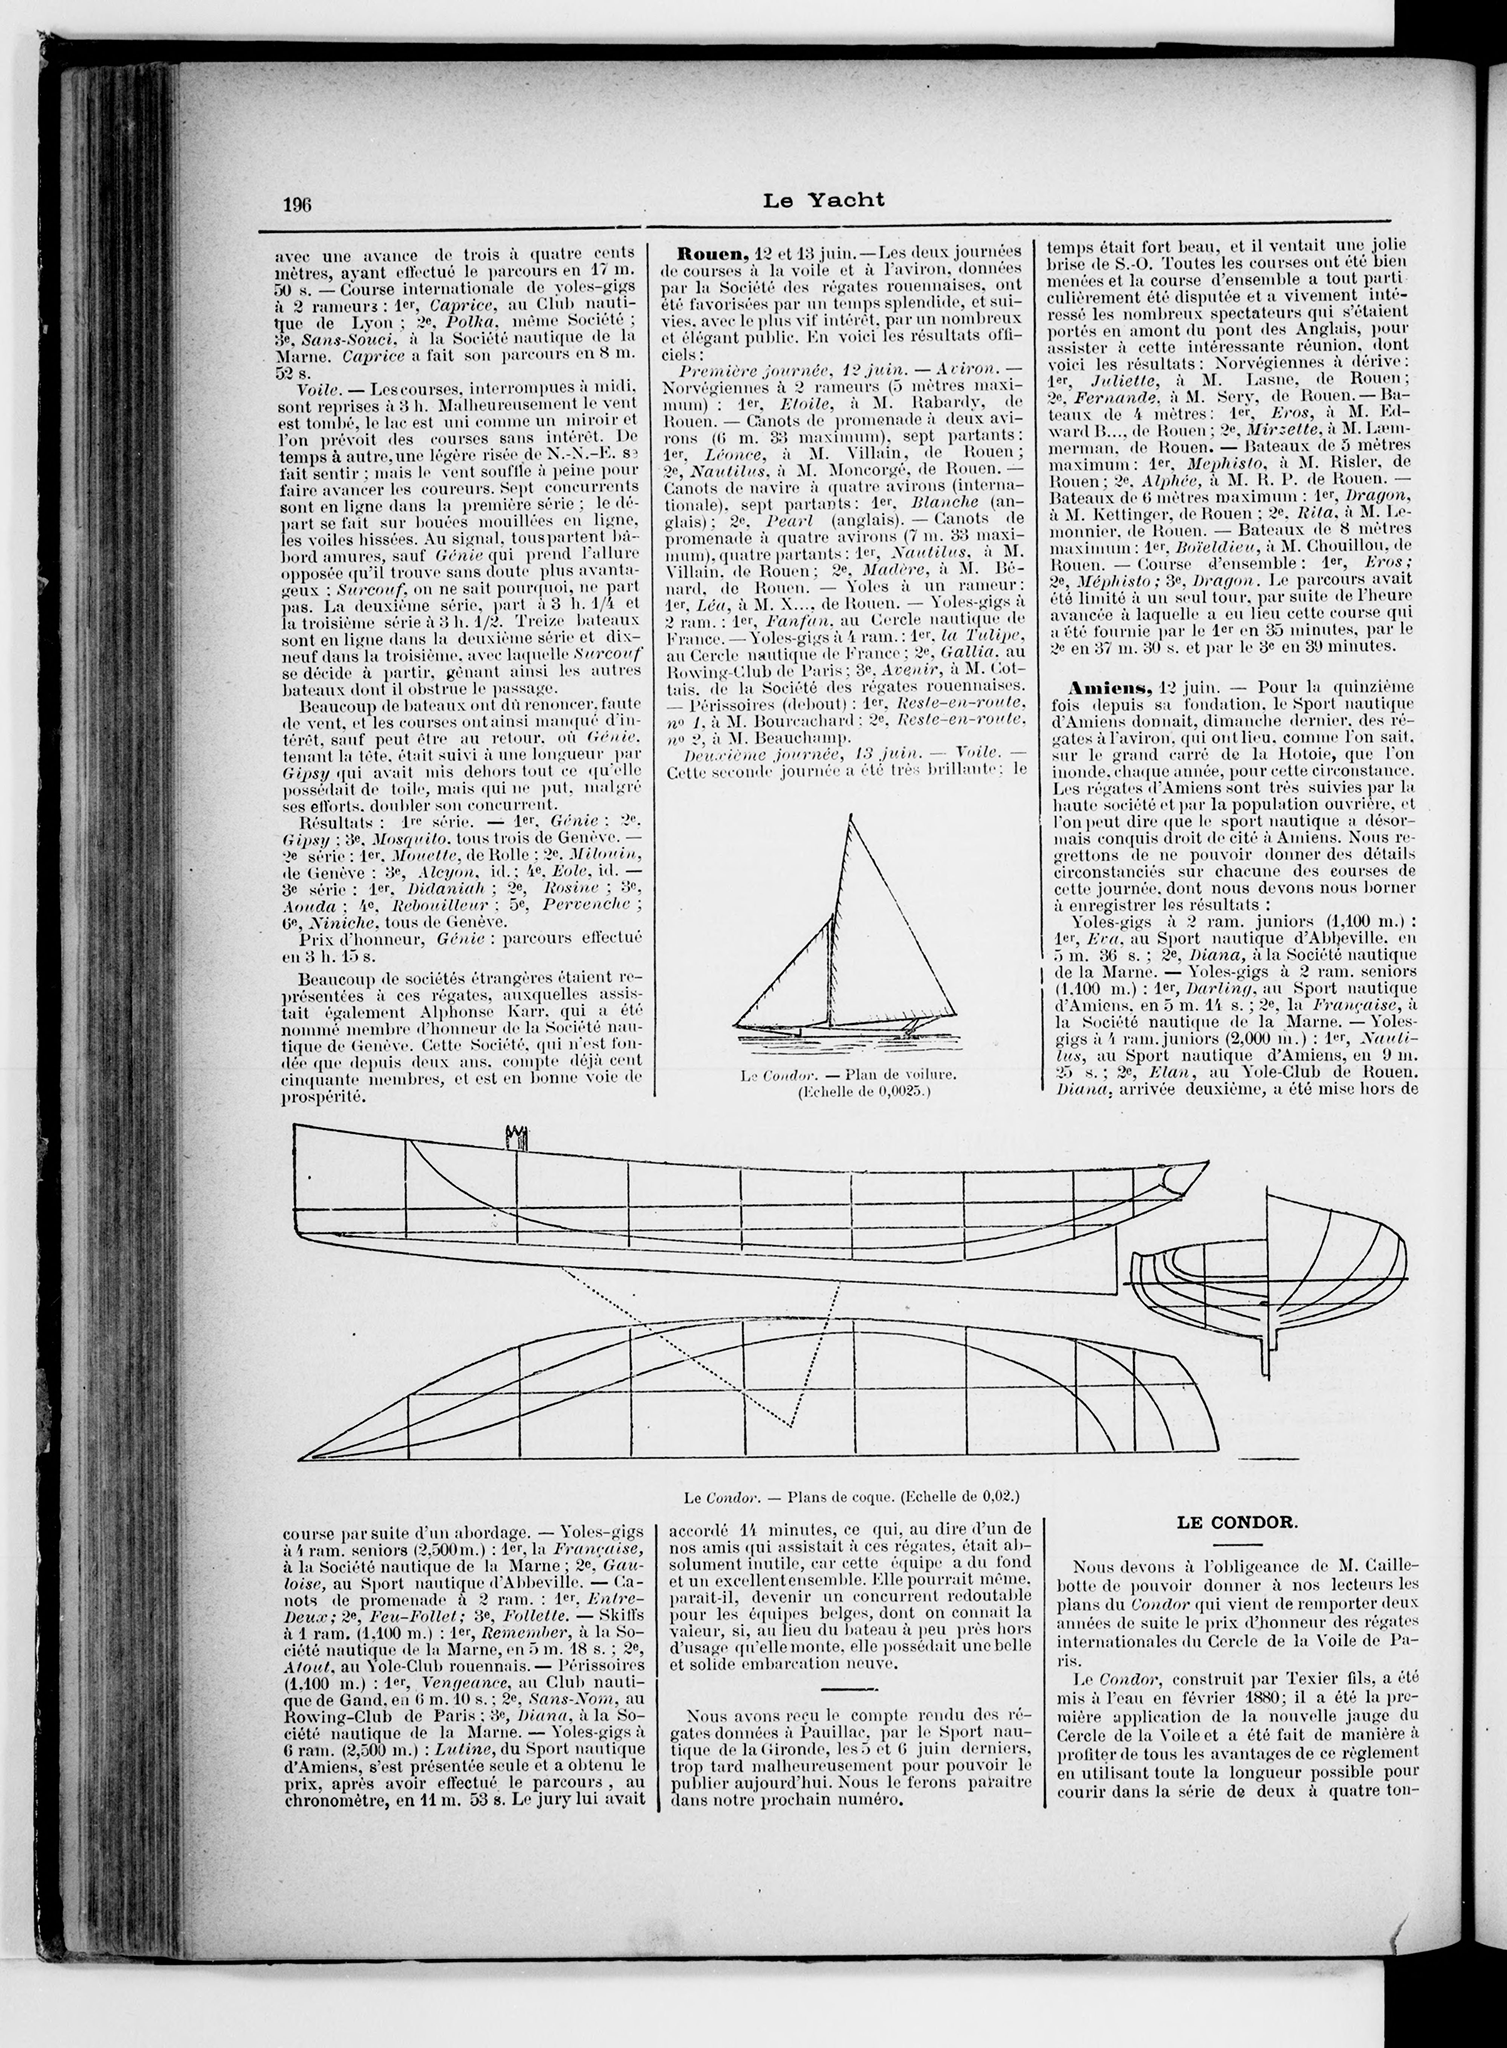 A photograph of a page that has a black and white blueprint of the hull of a sailboat. At the top of the page the word “Le Yacht” is written.